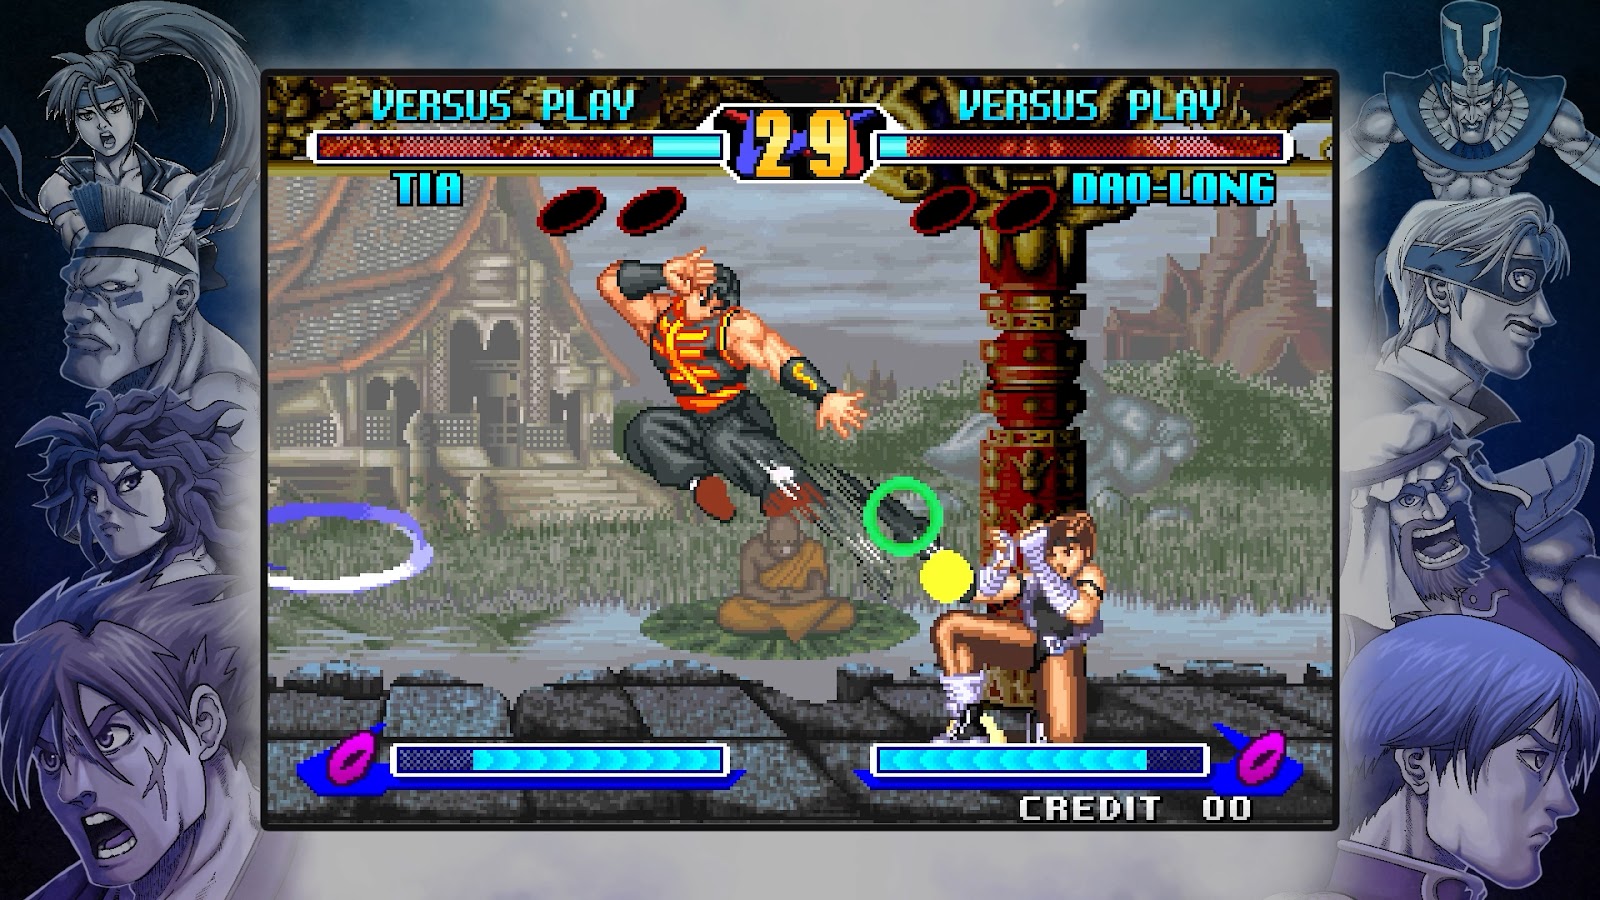 A screenshot of combat - one of the fighters is in the middle of a flying kick, the other is attempting to block.